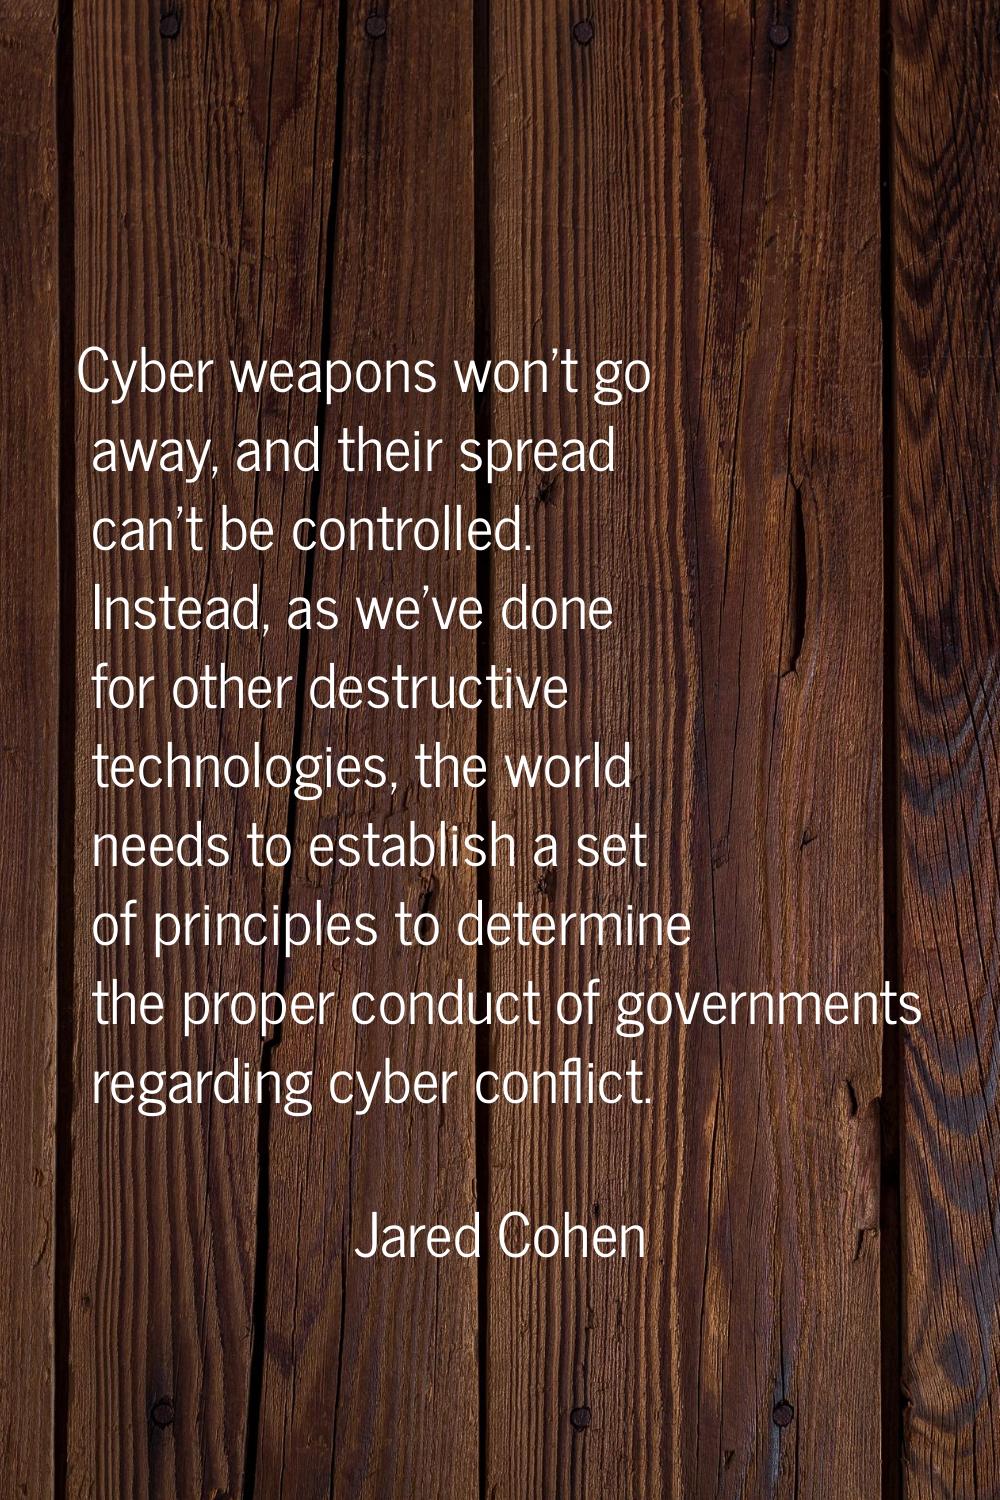 Cyber weapons won't go away, and their spread can't be controlled. Instead, as we've done for other